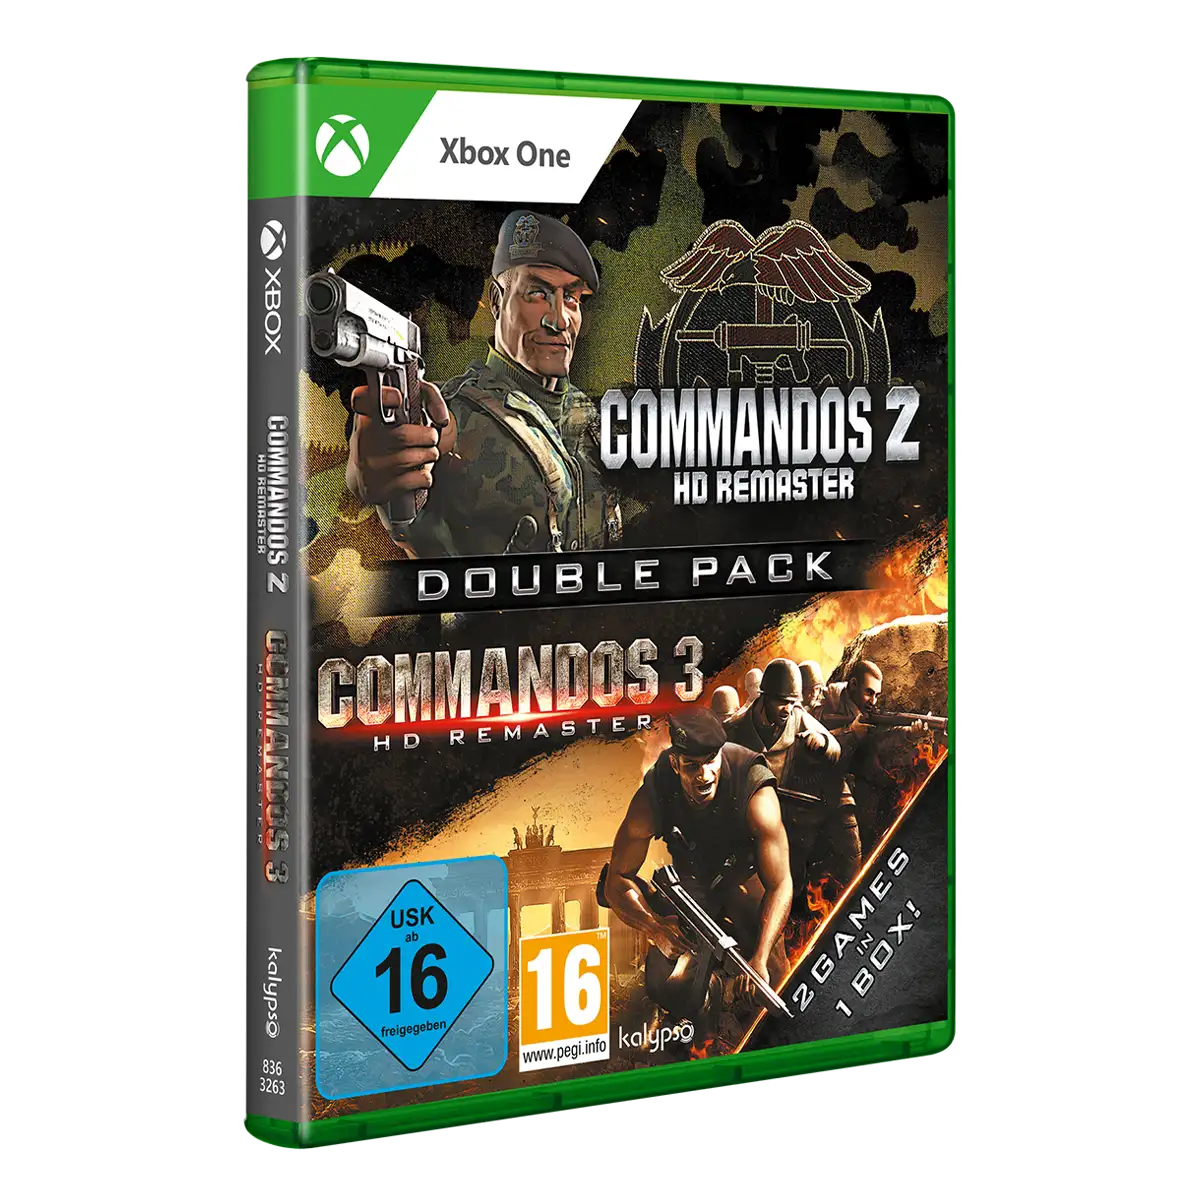 Commandos 2 & 3 - HD Remaster Double Pack (Xbox One) Image 2